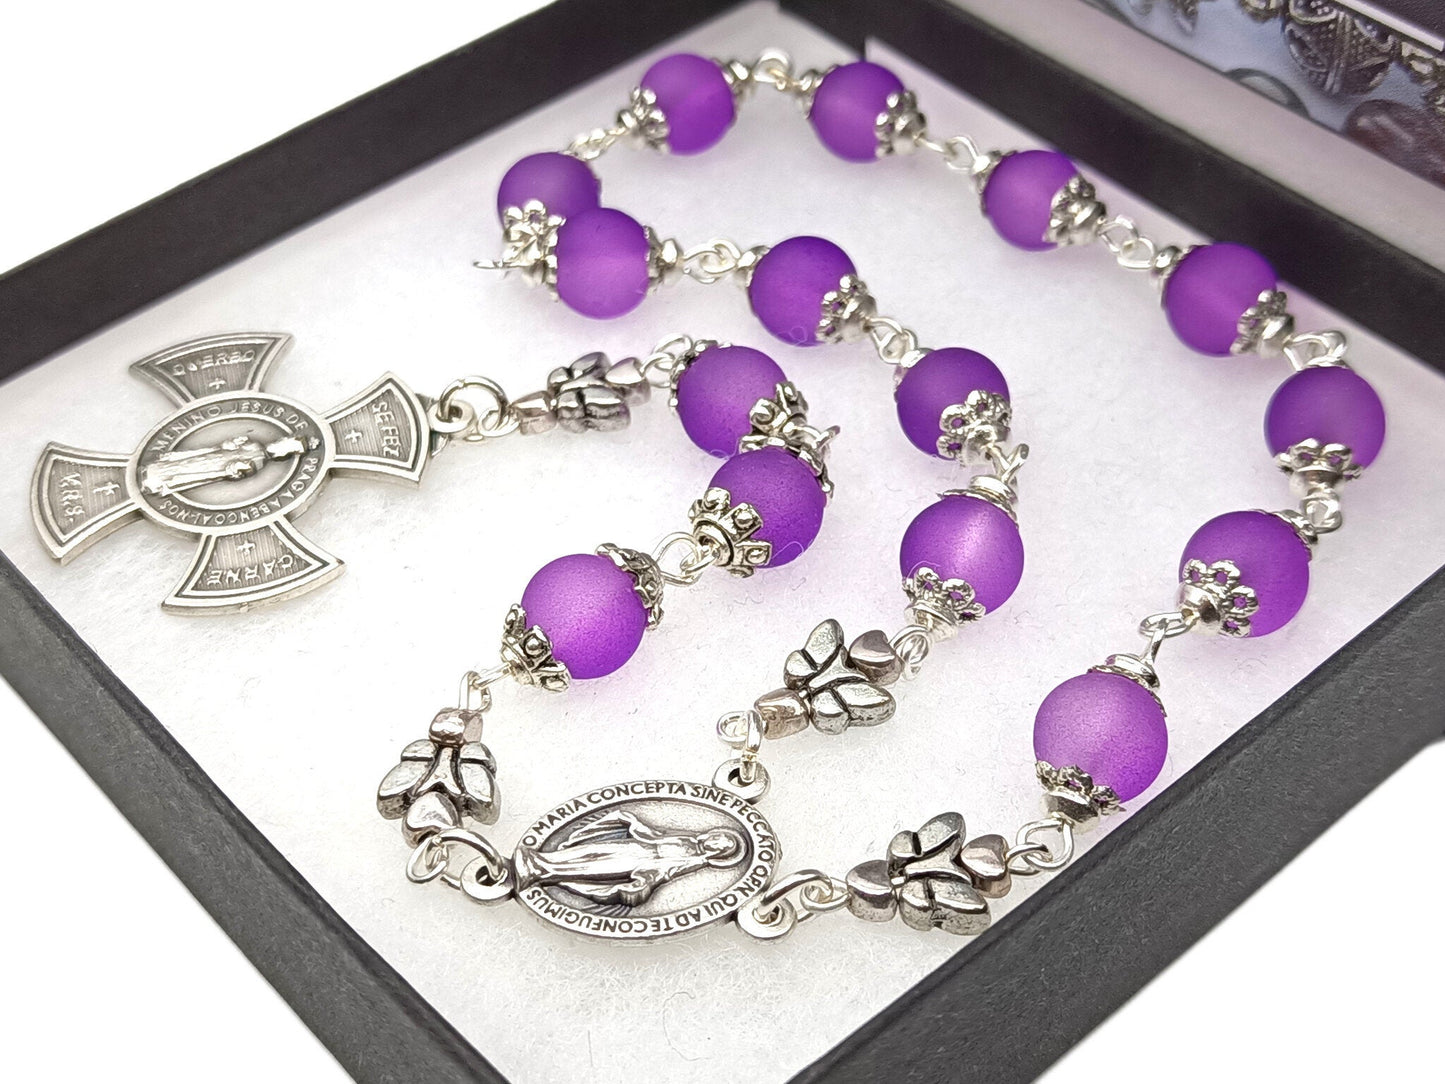 Infant of Prague unique rosary beads prayer chaplet with purple frosted glass beads and silver cross and miraculous medal.